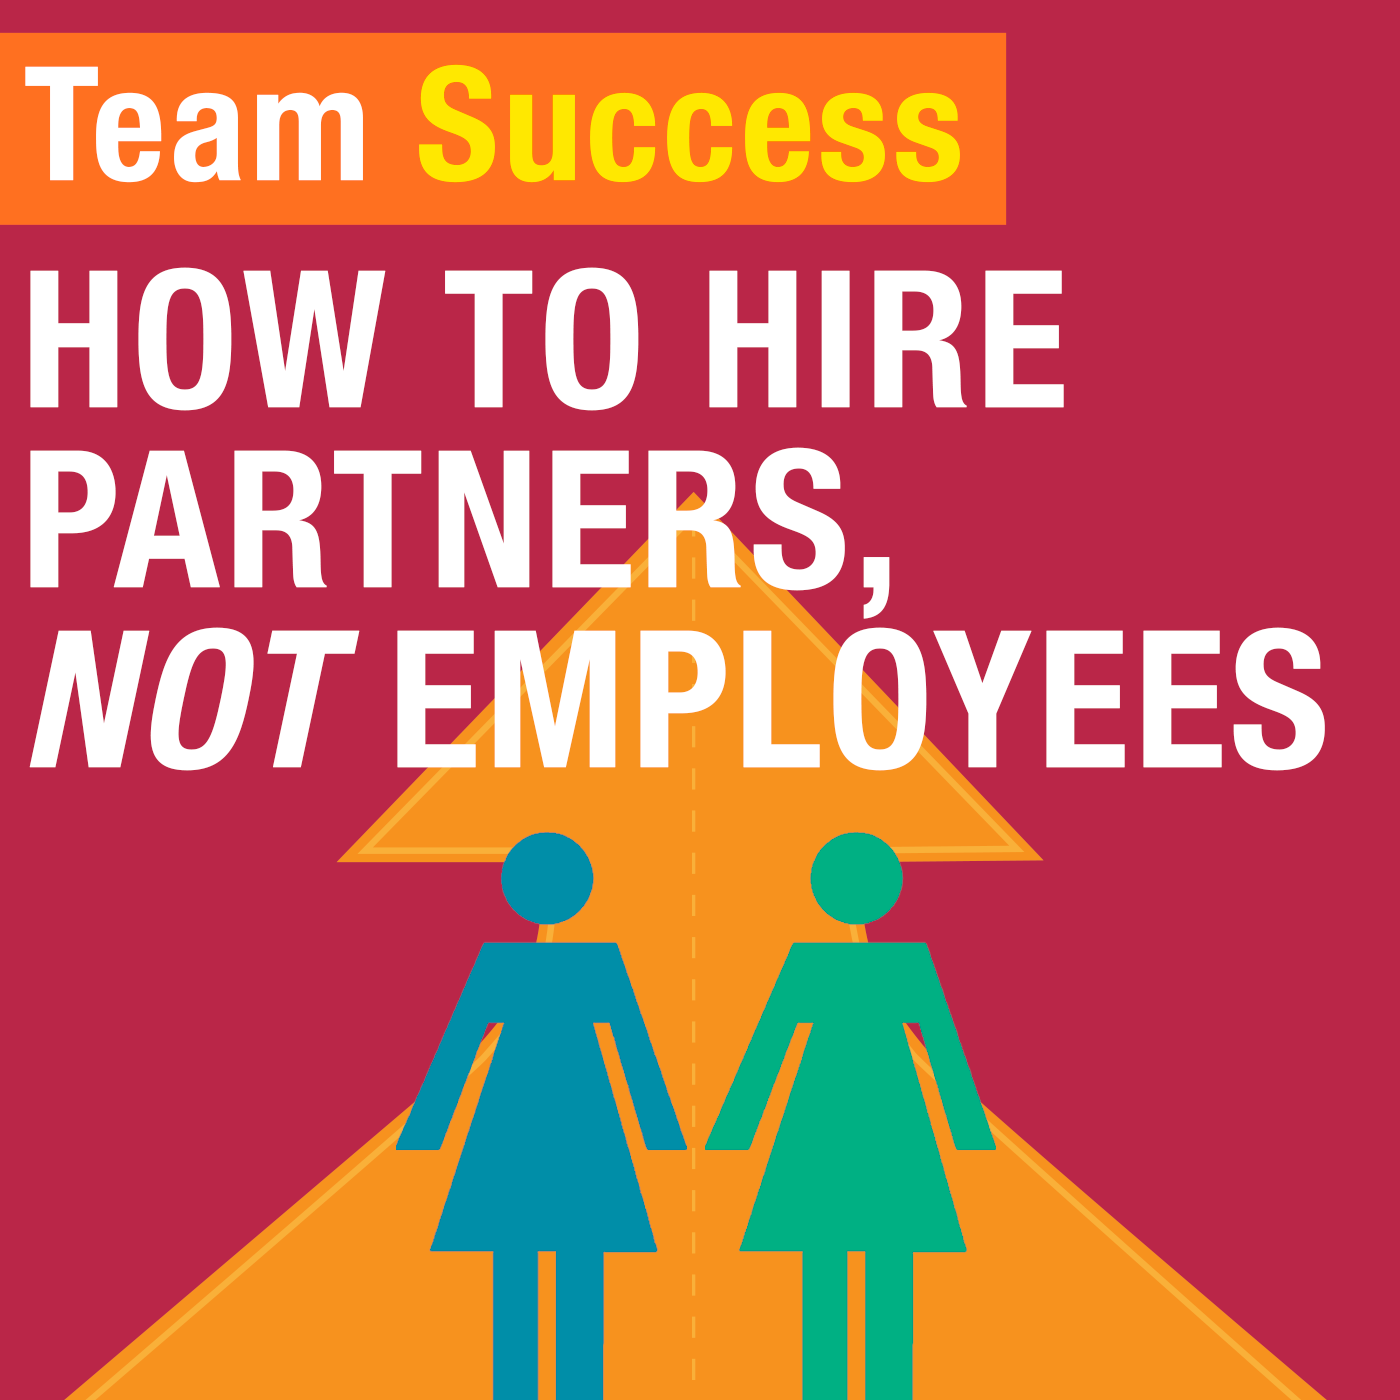 How To Hire Partners, Not Employees